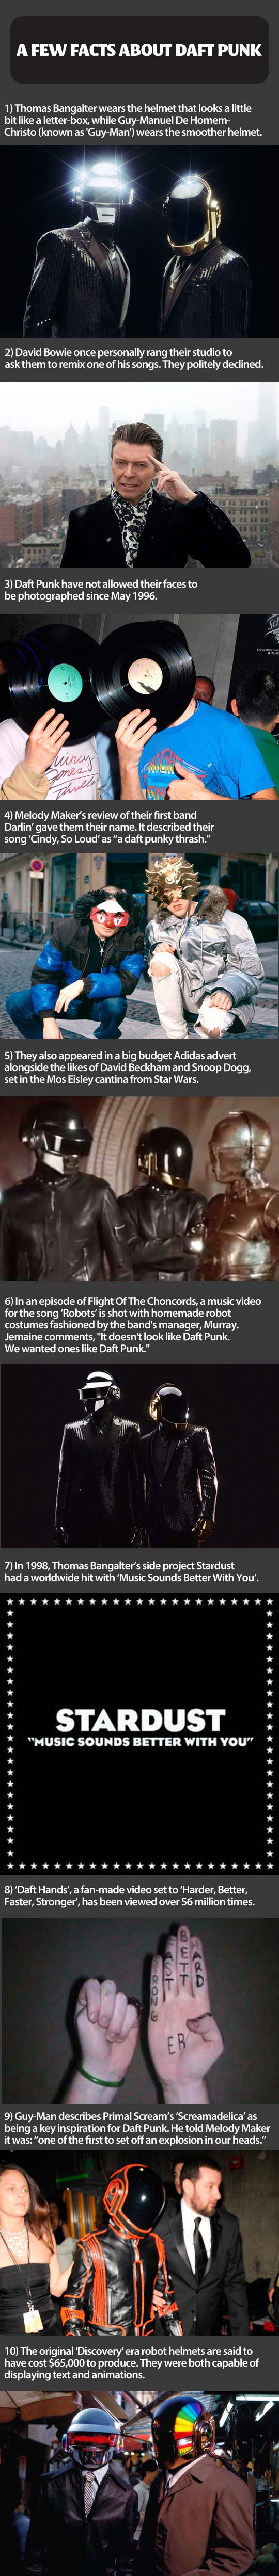 A few facts about Daft Punk.